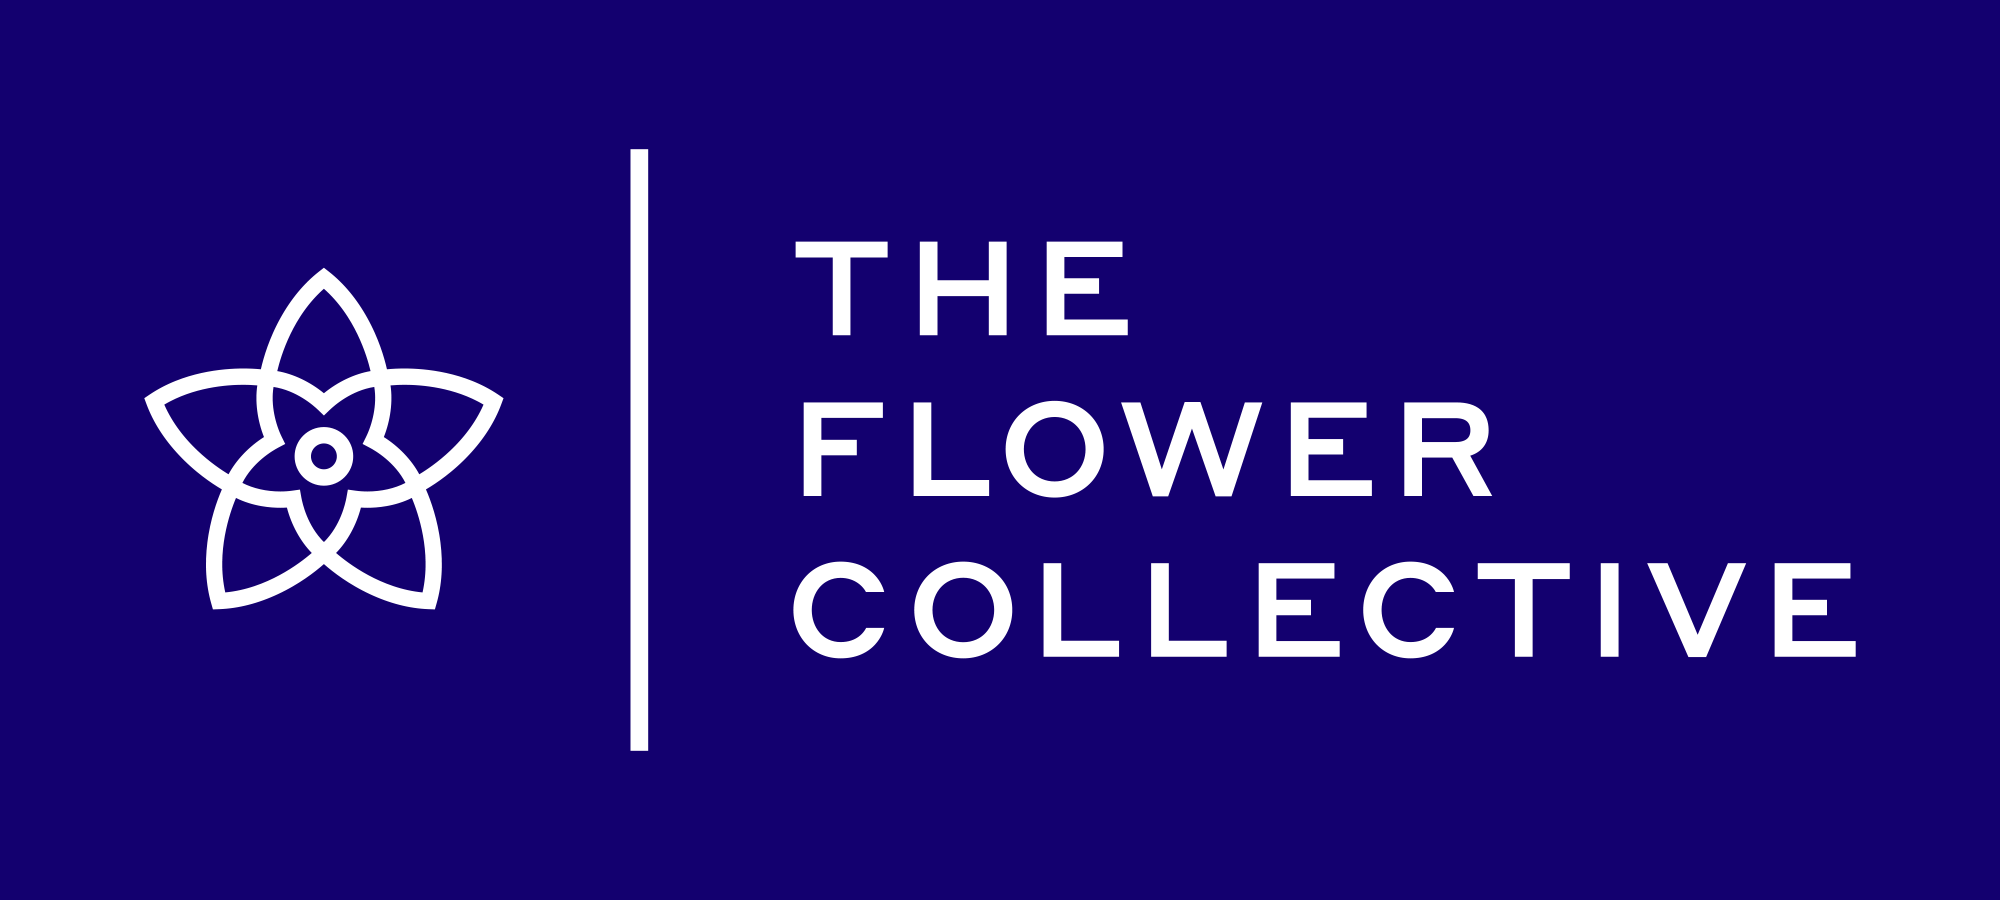 New Logo, Identity, and Packaging for The Flower Collective by Cast Iron Design